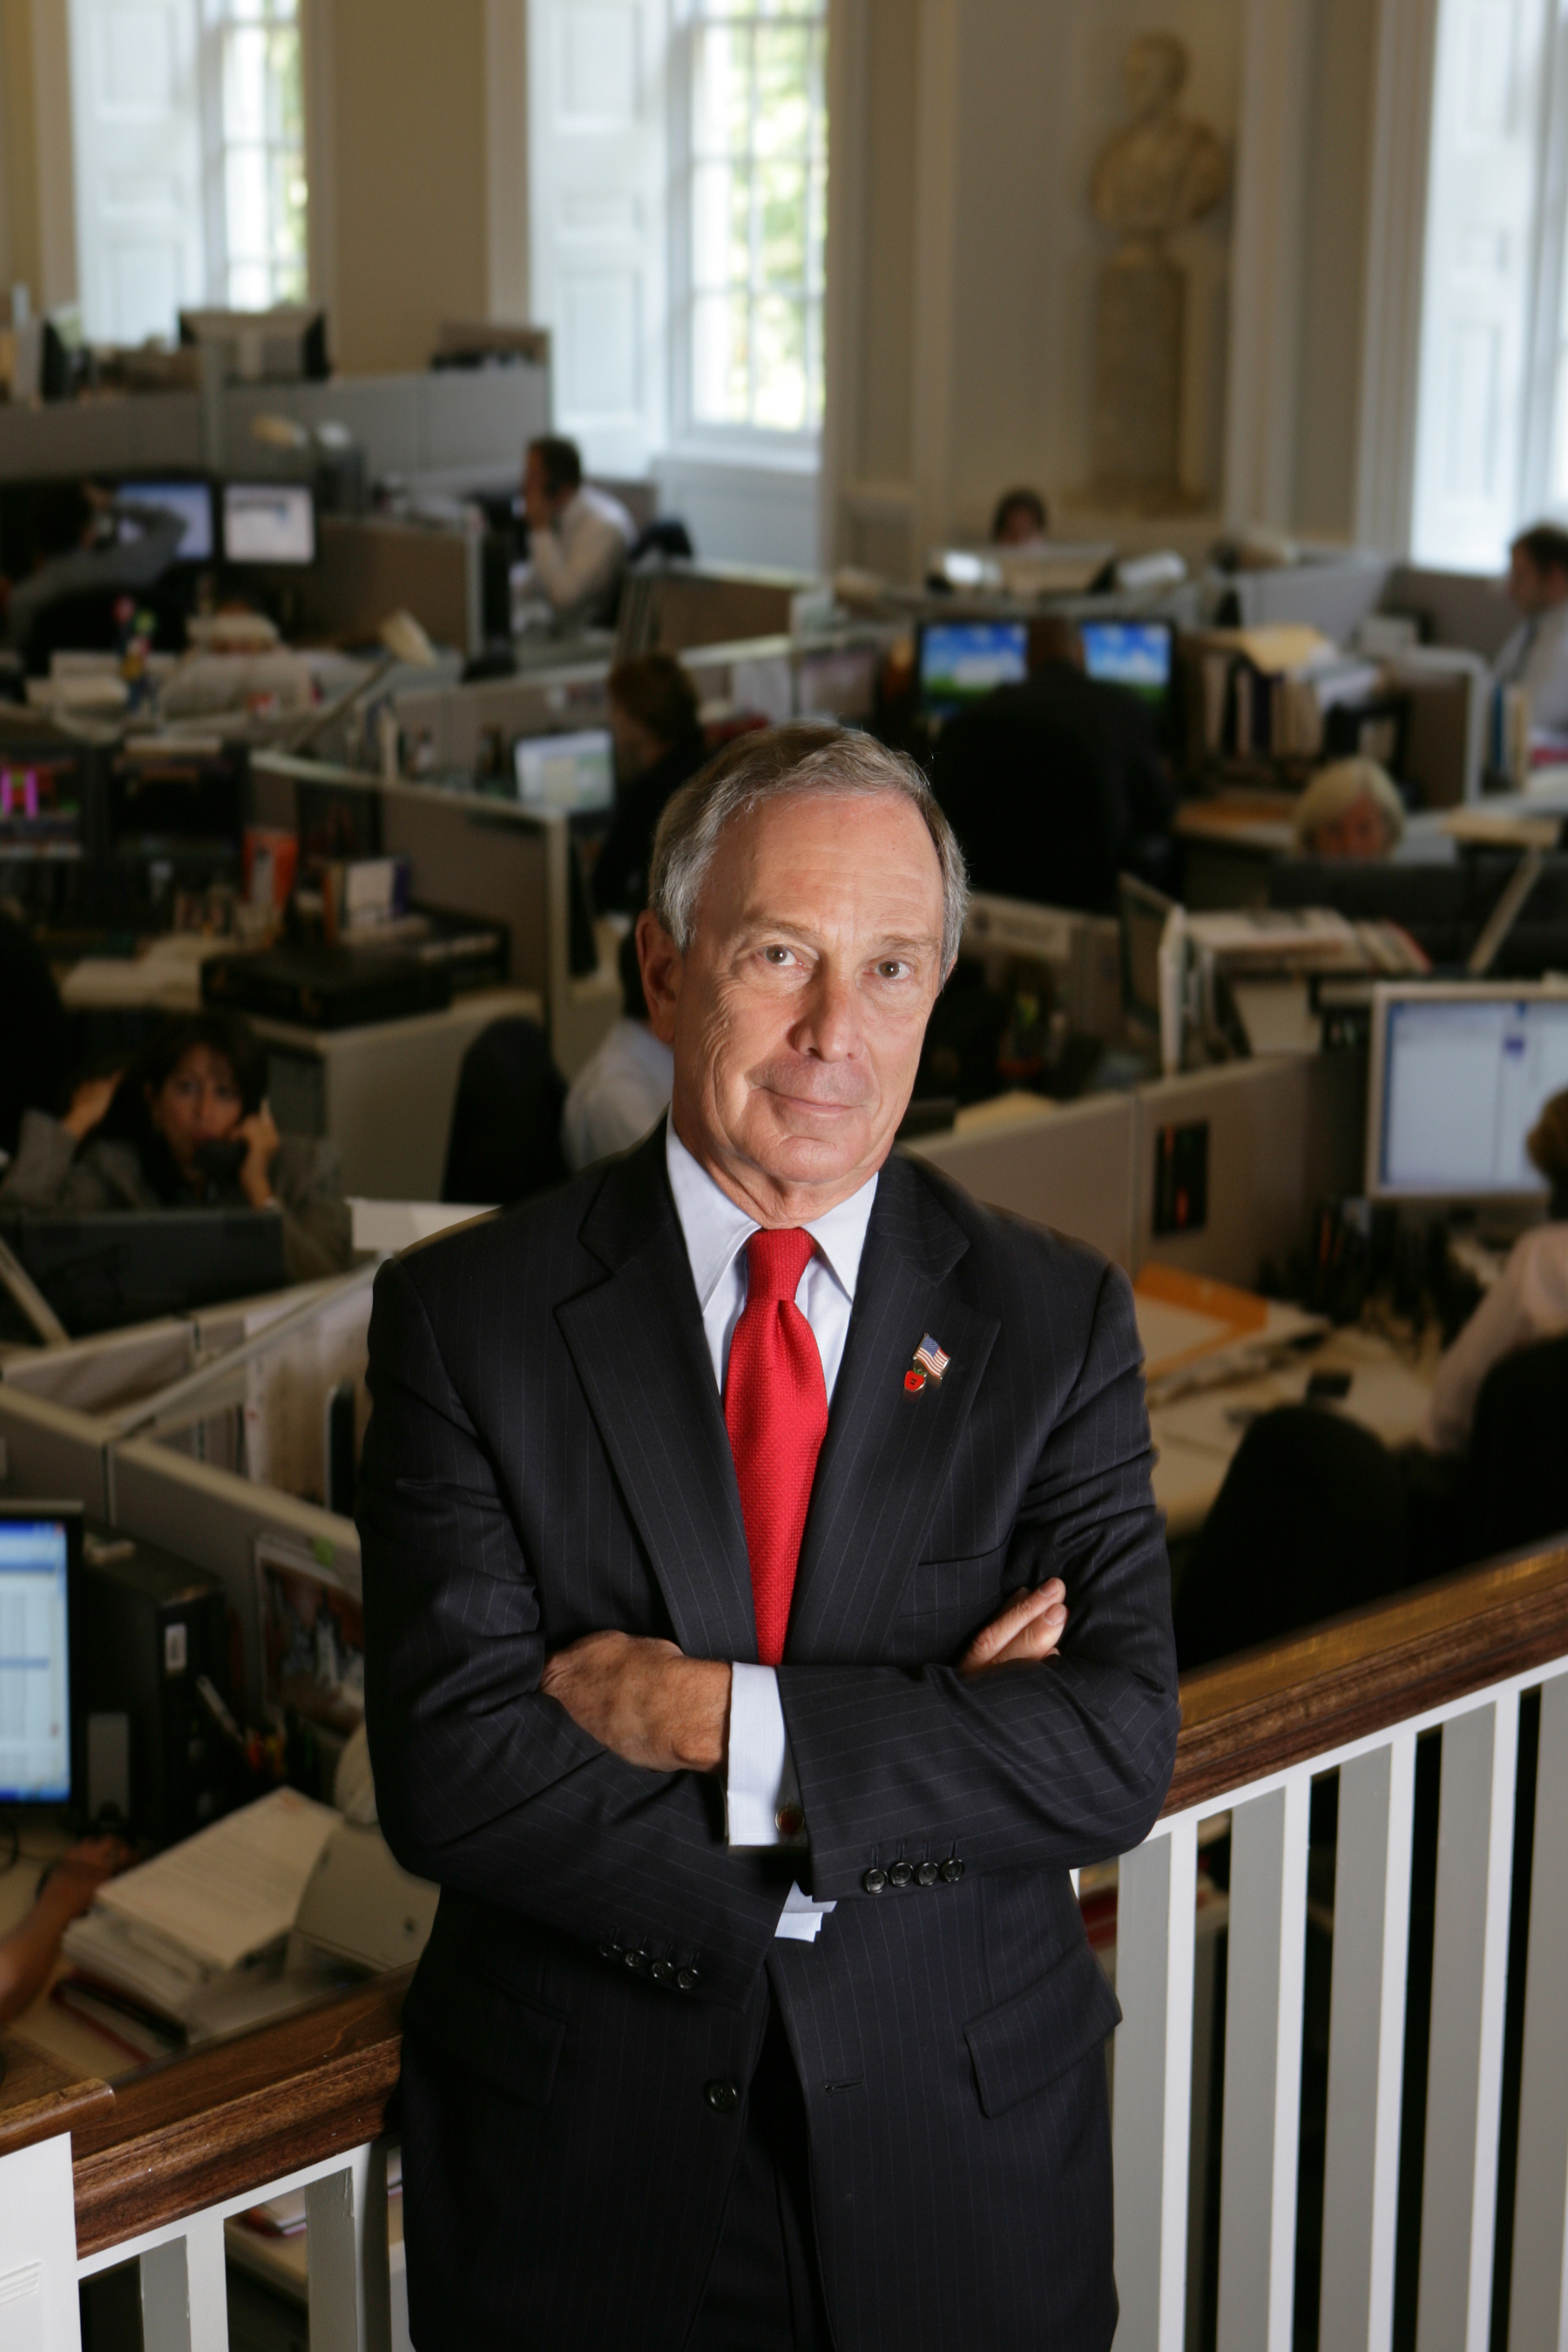 UPDATE 2-Bloomberg faces big challenges if he leaps into 2020 White House race